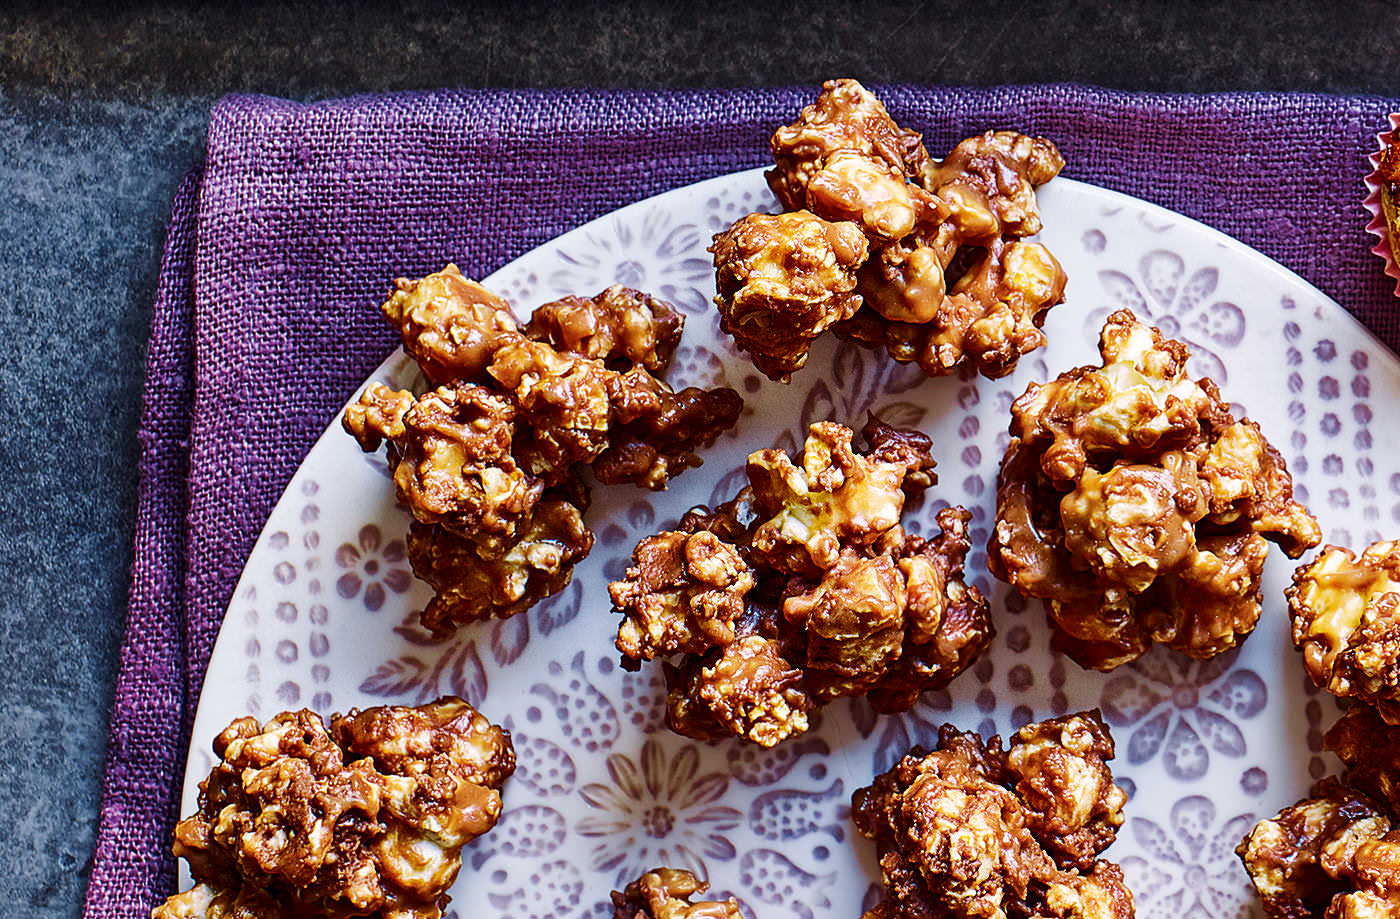 🍪 Say “Yuck” Or “Yum” to These Chocolatey Treats and We’ll Guess Your Zodiac Sign Salted Caramel And Chocolate Popcorn